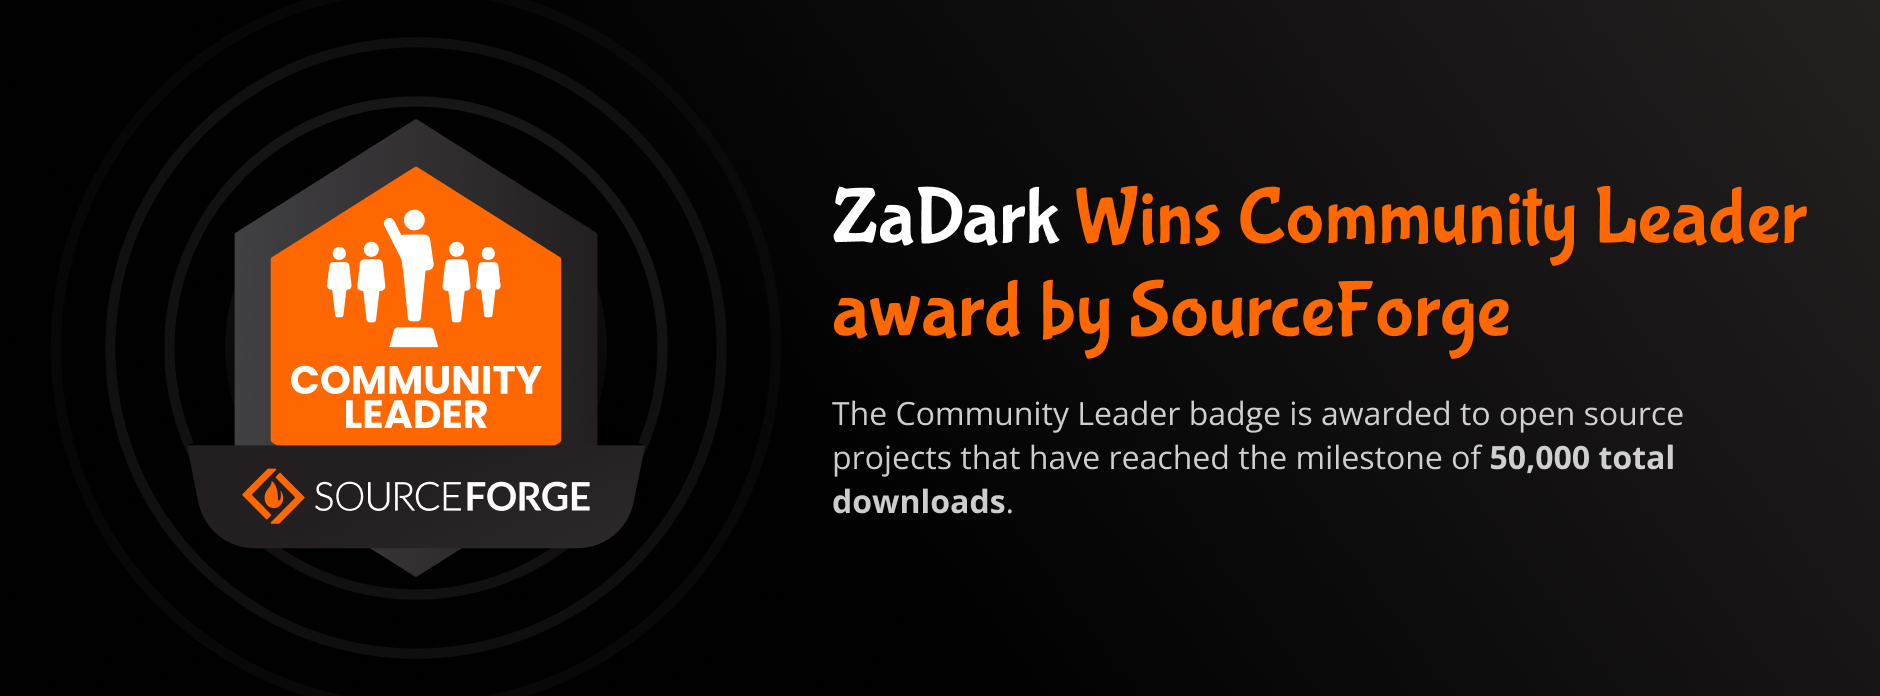 Community Leader award by SourceForge